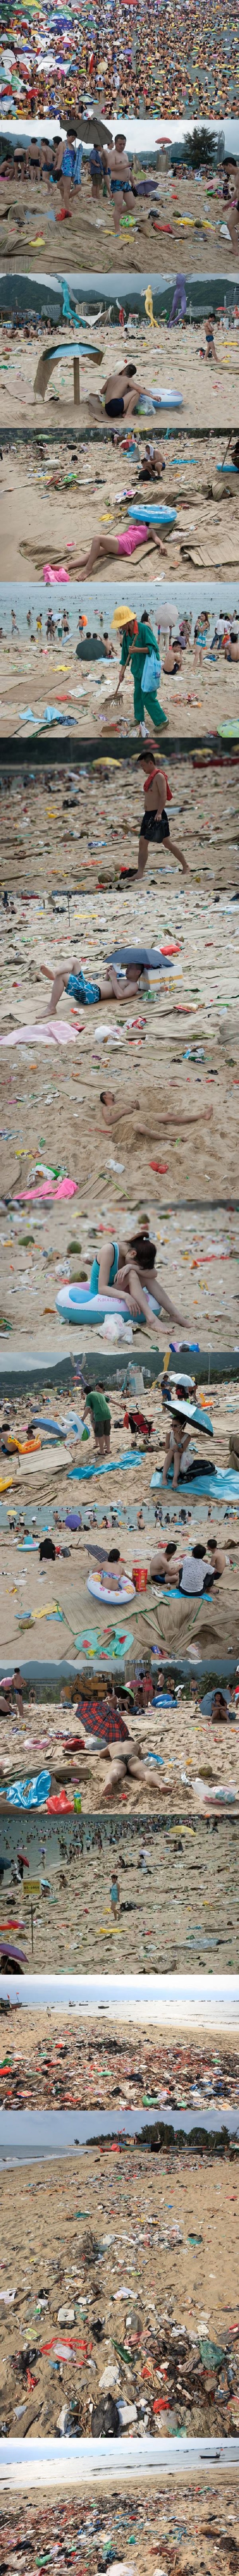 Dirty beaches in China